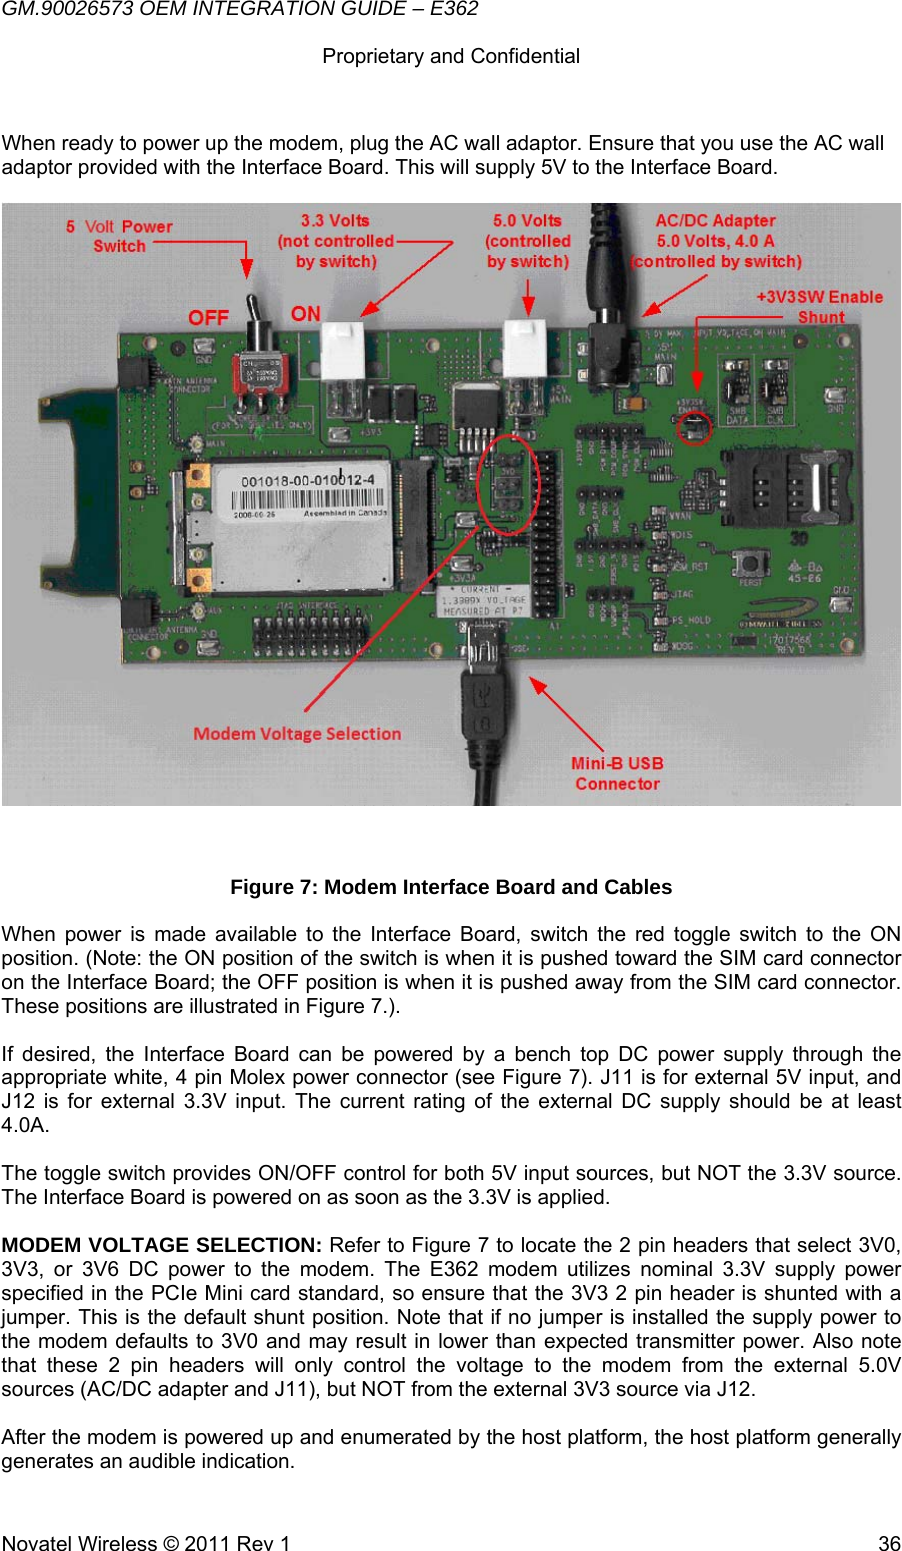 GM.90026573 OEM INTEGRATION GUIDE – E362      Proprietary and Confidential   Novatel Wireless © 2011 Rev 1  36When ready to power up the modem, plug the AC wall adaptor. Ensure that you use the AC wall adaptor provided with the Interface Board. This will supply 5V to the Interface Board.    Figure 7: Modem Interface Board and Cables When power is made available to the Interface Board, switch the red toggle switch to the ON position. (Note: the ON position of the switch is when it is pushed toward the SIM card connector on the Interface Board; the OFF position is when it is pushed away from the SIM card connector. These positions are illustrated in Figure 7.).  If desired, the Interface Board can be powered by a bench top DC power supply through the appropriate white, 4 pin Molex power connector (see Figure 7). J11 is for external 5V input, and J12 is for external 3.3V input. The current rating of the external DC supply should be at least 4.0A.  The toggle switch provides ON/OFF control for both 5V input sources, but NOT the 3.3V source. The Interface Board is powered on as soon as the 3.3V is applied.  MODEM VOLTAGE SELECTION: Refer to Figure 7 to locate the 2 pin headers that select 3V0, 3V3, or 3V6 DC power to the modem. The E362 modem utilizes nominal 3.3V supply power specified in the PCIe Mini card standard, so ensure that the 3V3 2 pin header is shunted with a jumper. This is the default shunt position. Note that if no jumper is installed the supply power to the modem defaults to 3V0 and may result in lower than expected transmitter power. Also note that these 2 pin headers will only control the voltage to the modem from the external 5.0V sources (AC/DC adapter and J11), but NOT from the external 3V3 source via J12.  After the modem is powered up and enumerated by the host platform, the host platform generally generates an audible indication. 